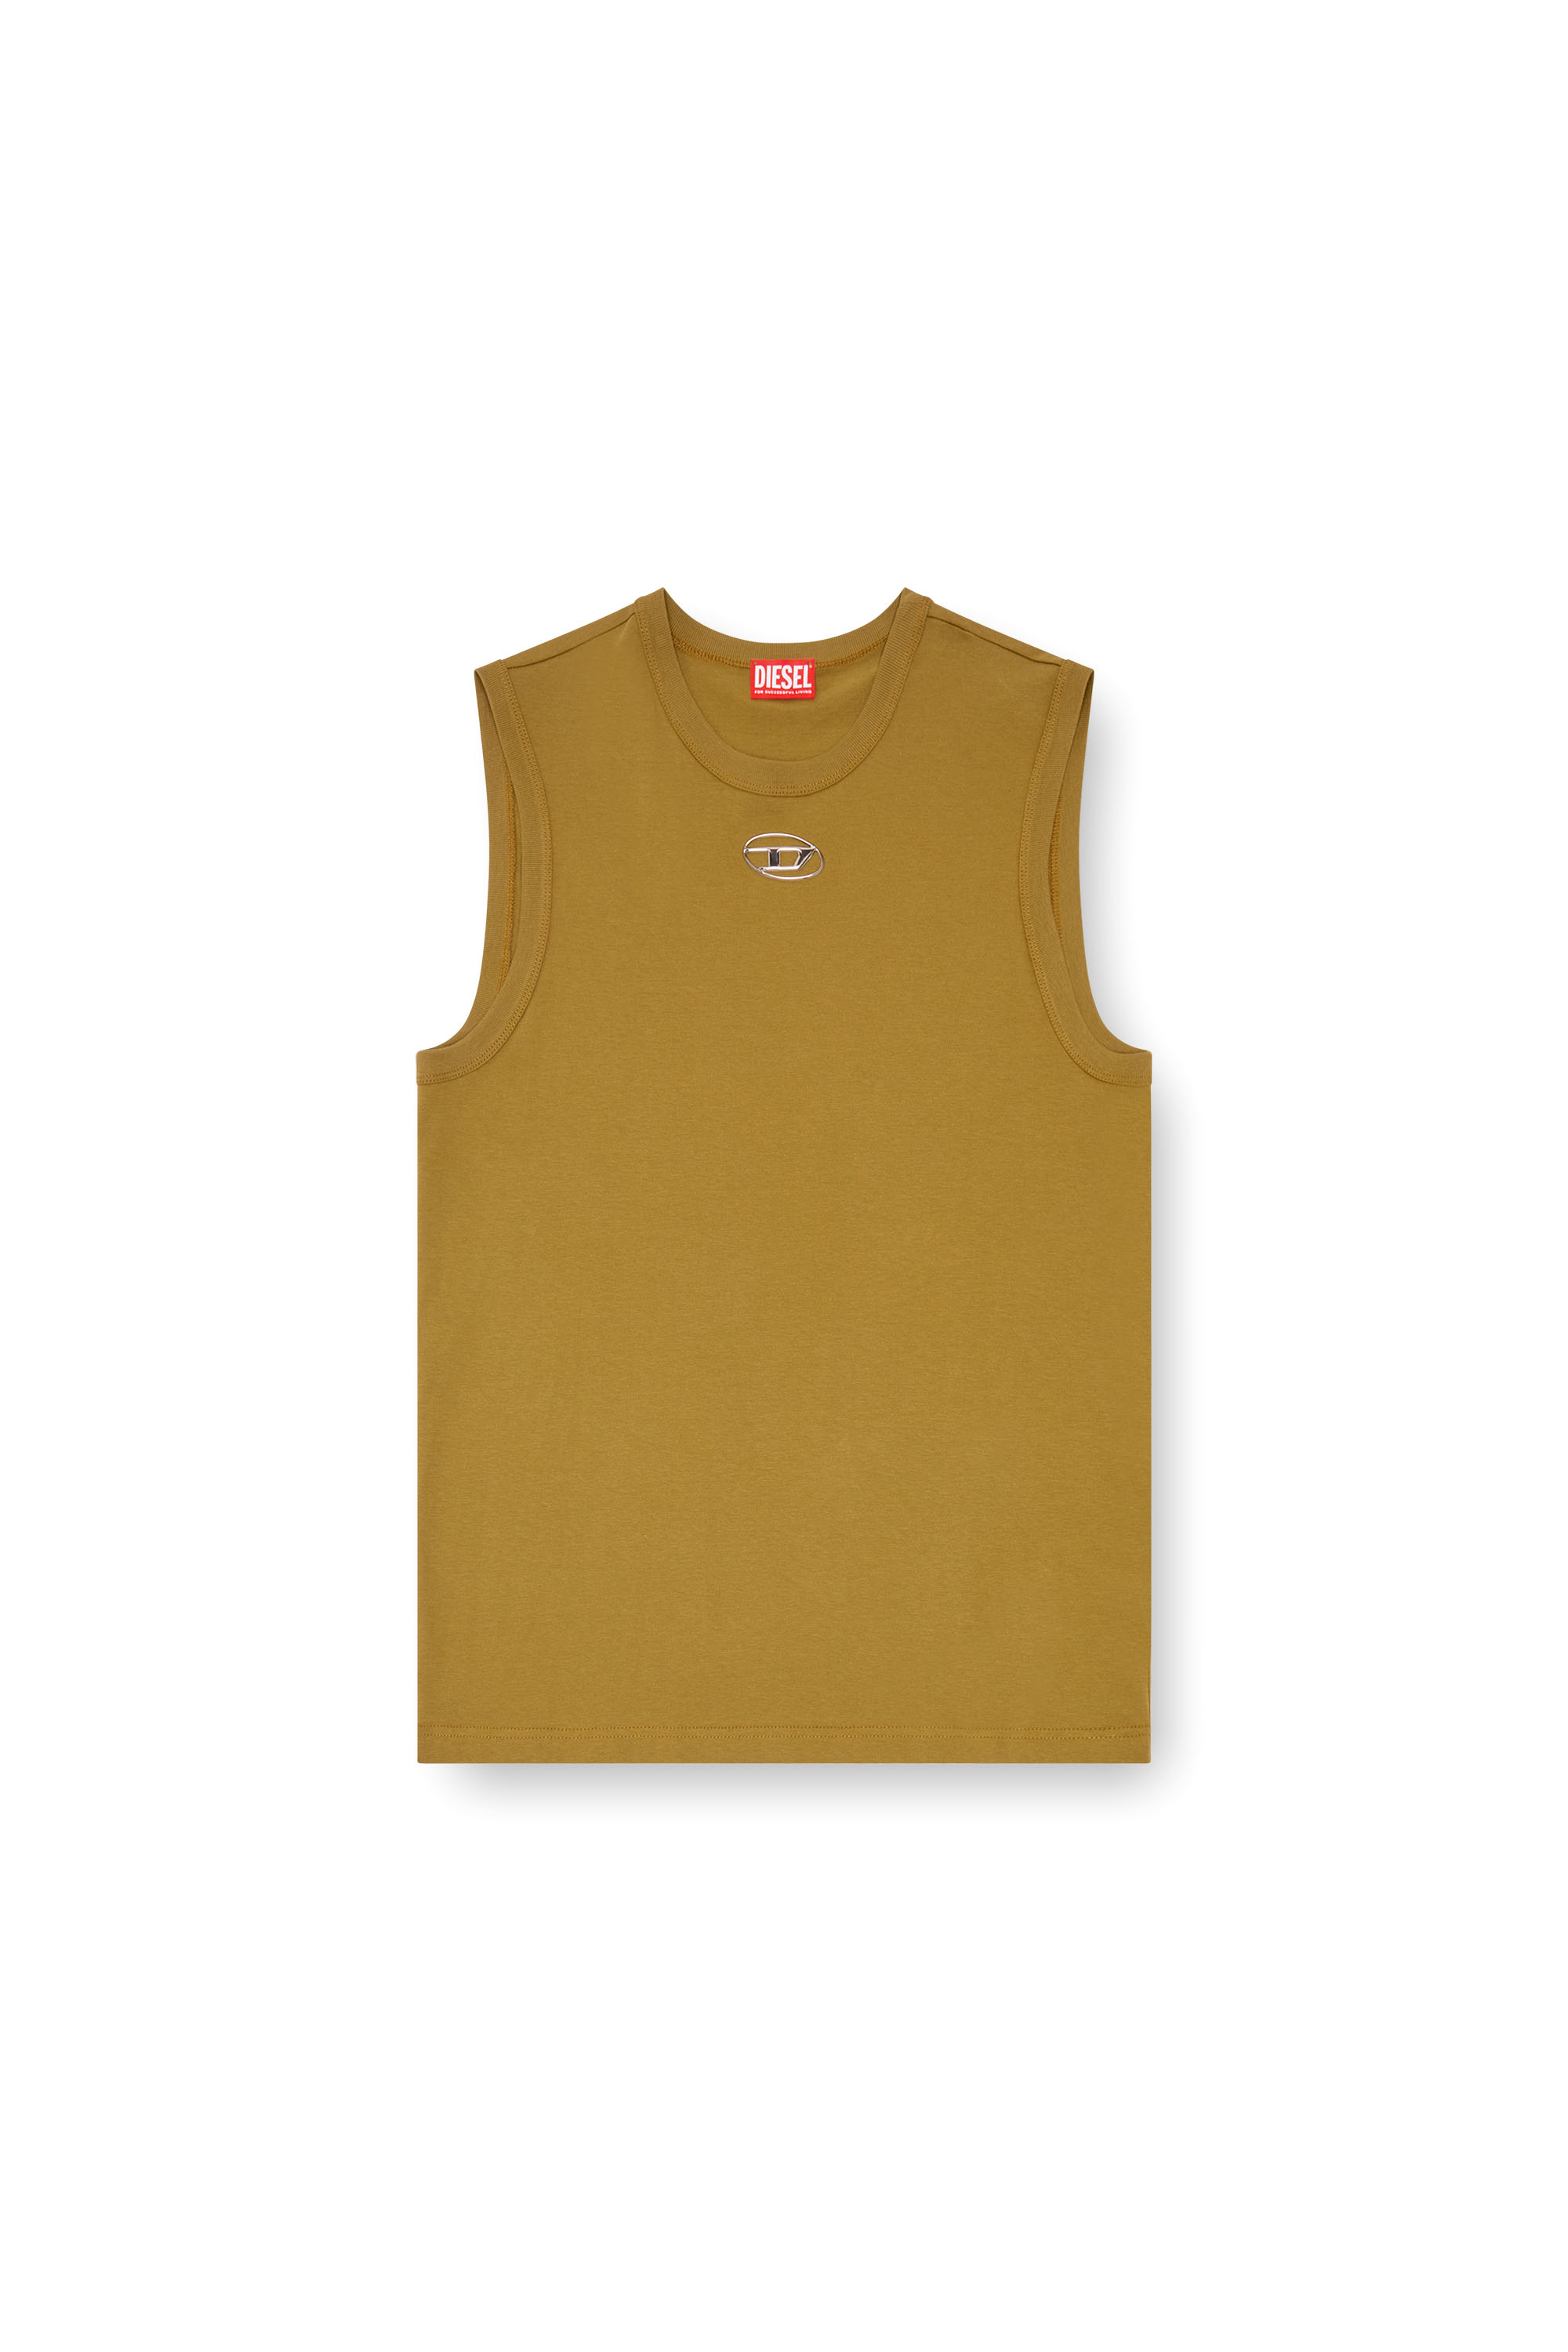 Diesel - T-BISCO-OD, Man Tank top with injection-moulded Oval D in Brown - Image 3